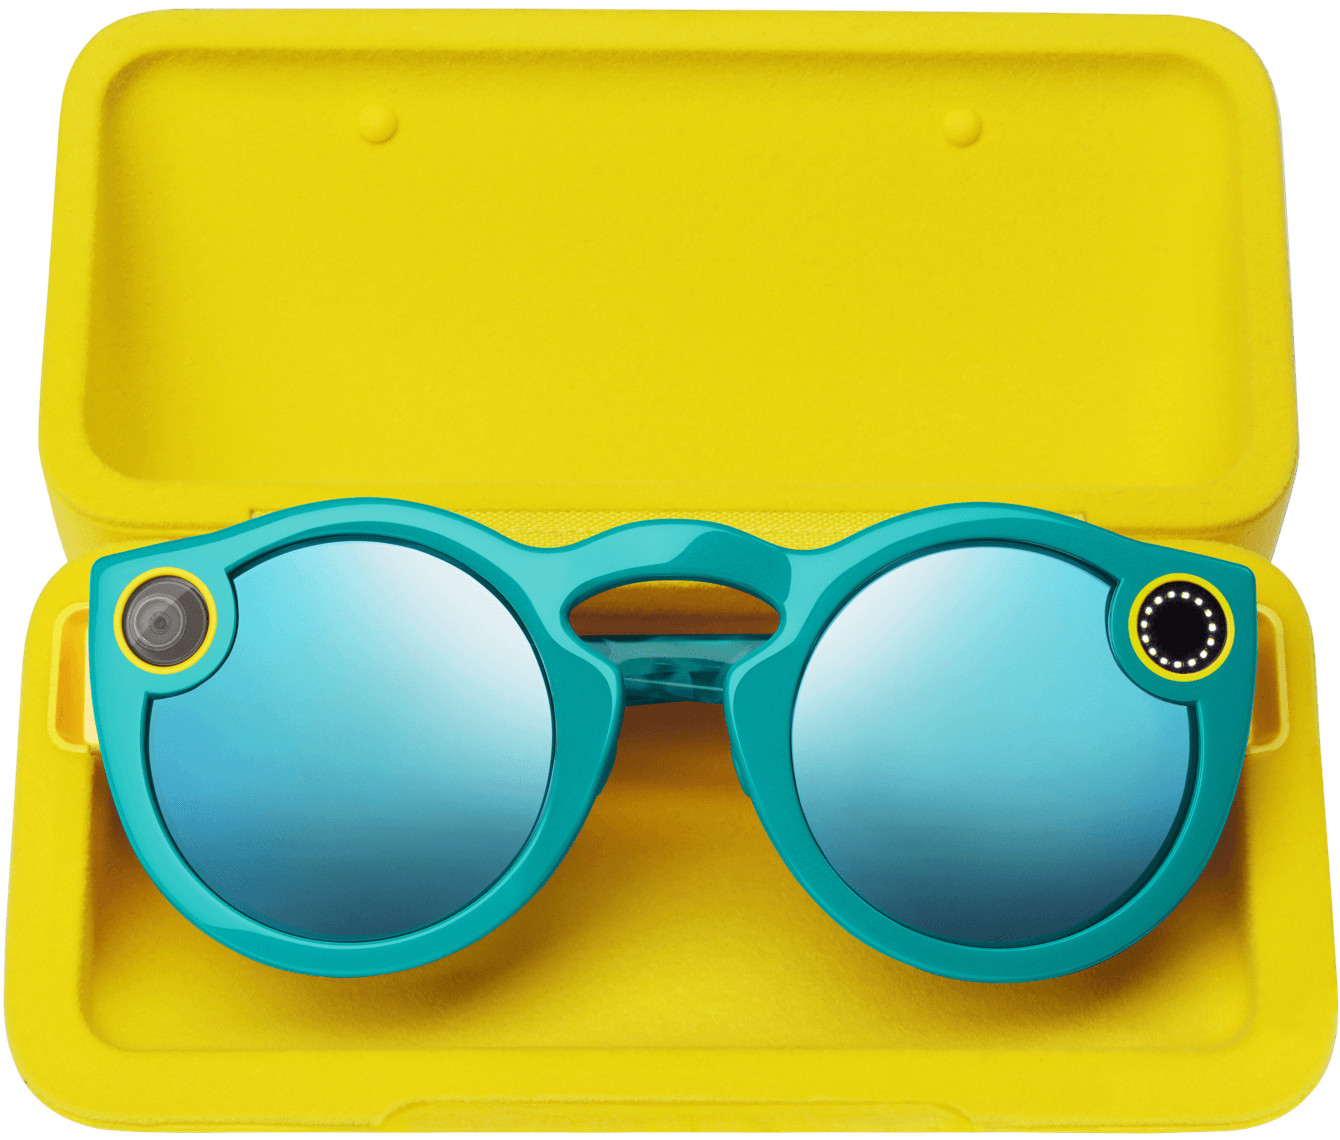 Óculos Spectacles, do Snapchat